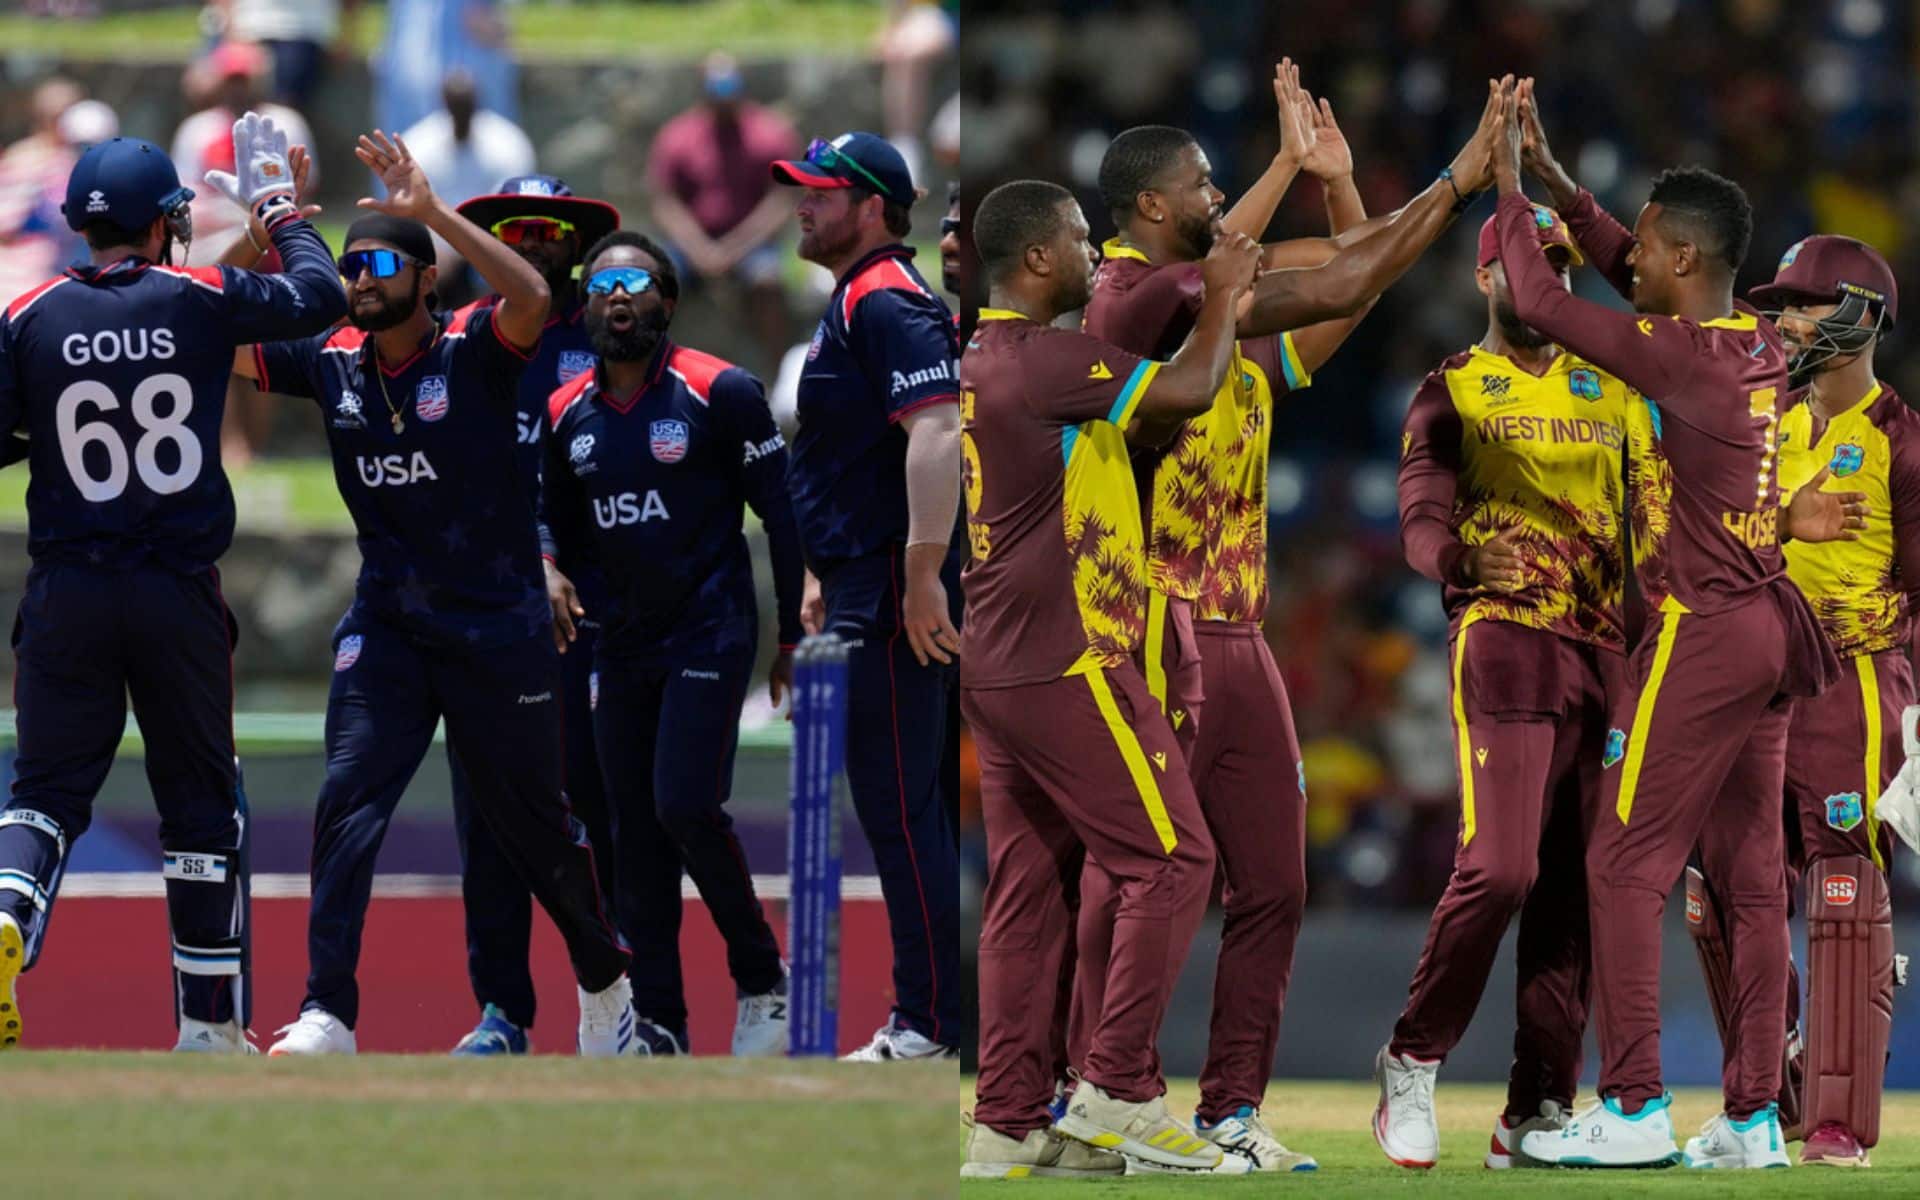 USA will face West Indies in a must-win match for both sides (AP Photo)